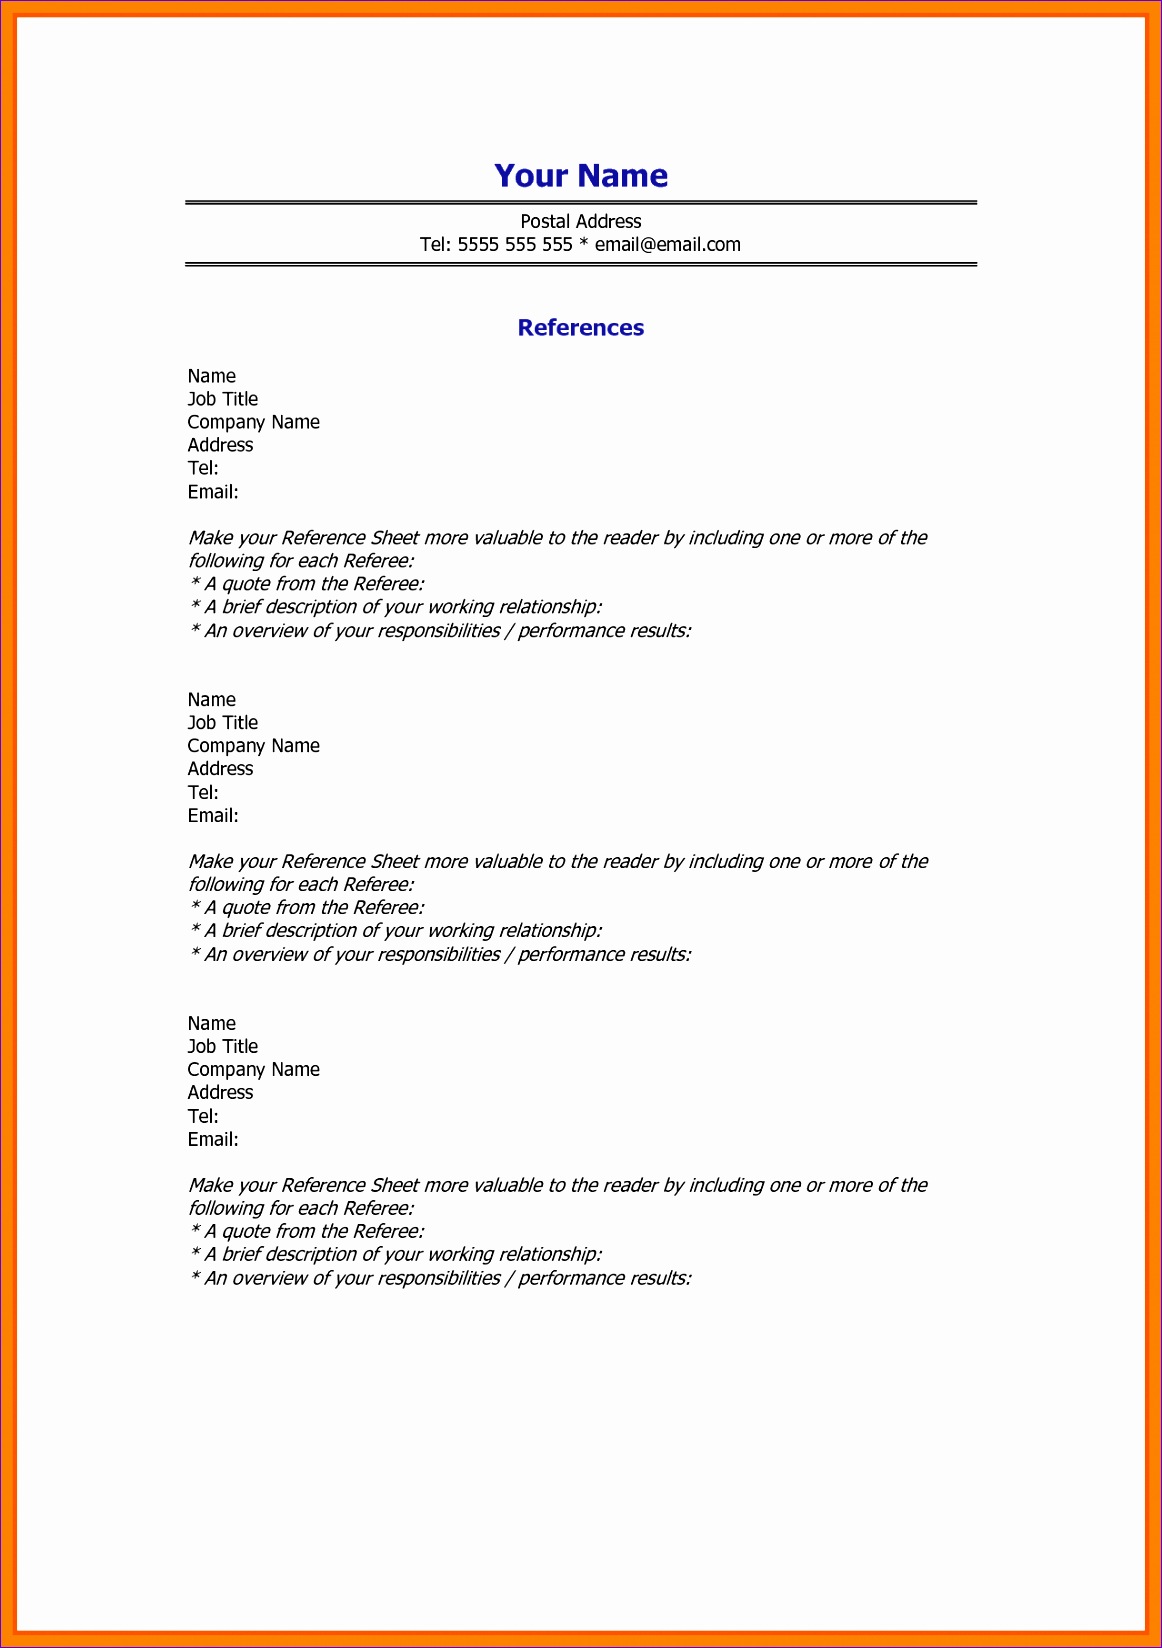 reference sheet example reference sheet for resume job references meaning autosys a job scheduling tool dba references job references employment references template job references template